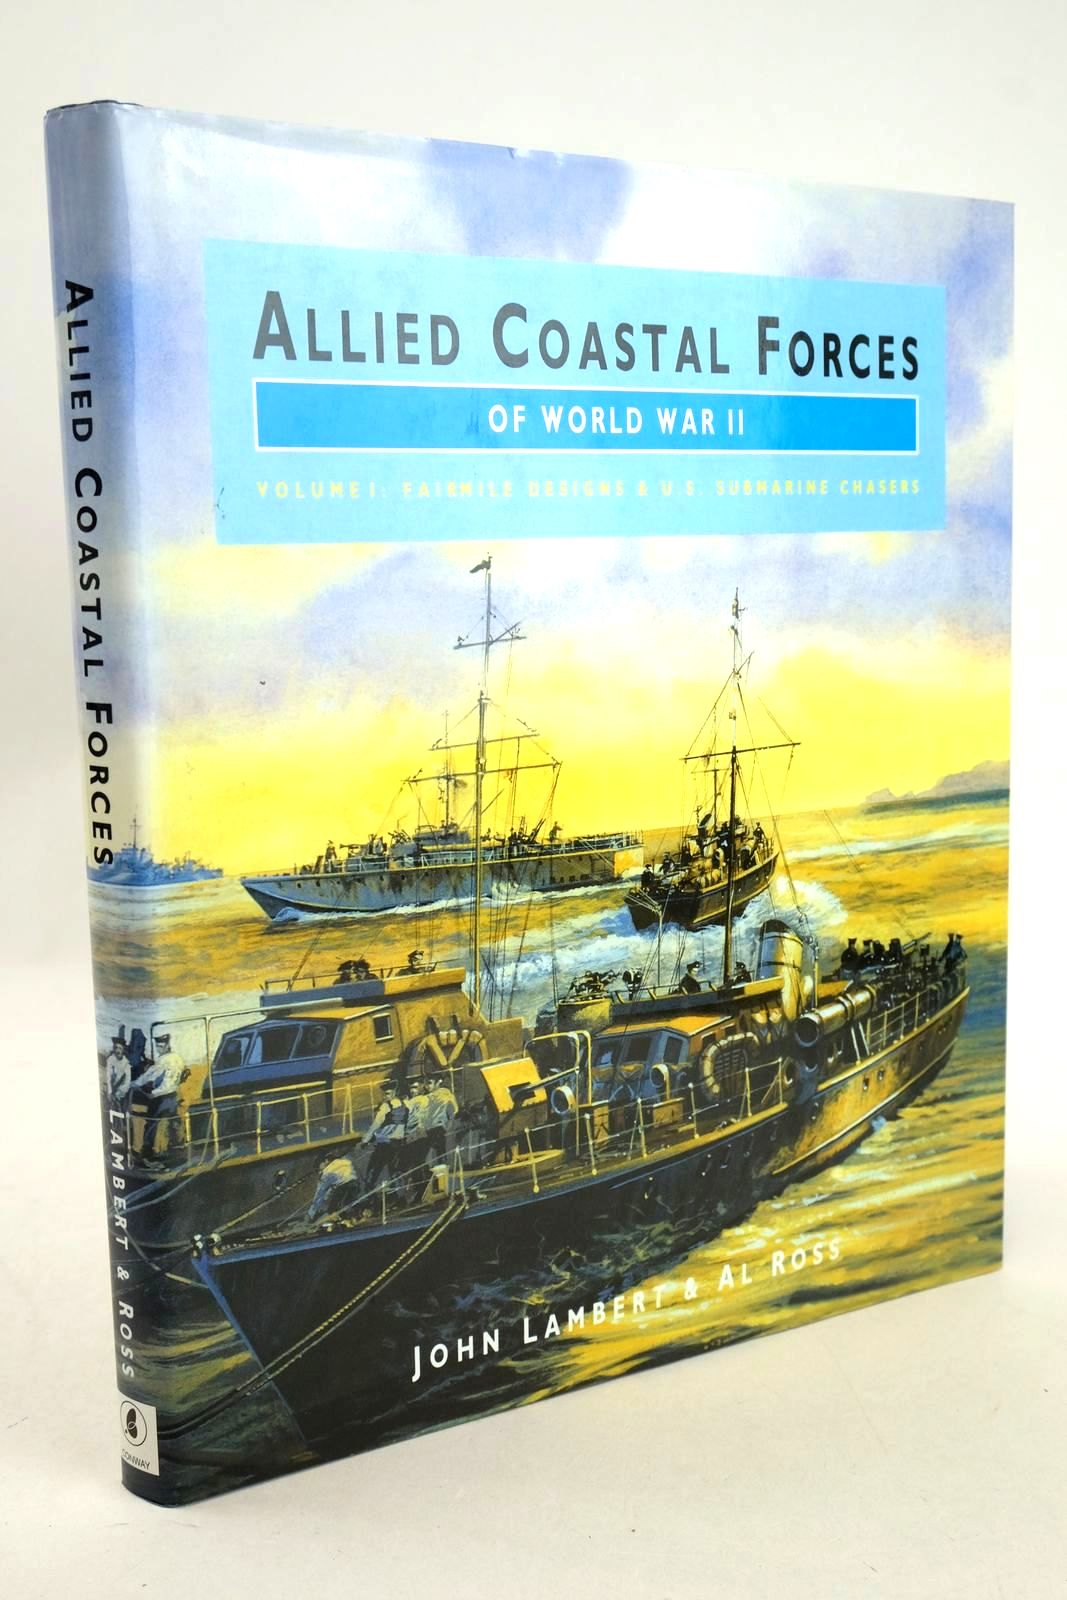 Photo of ALLIED COASTAL FORCES OF WORLD WAR II VOLUME 1: FAIRMILE DESIGNS AND US SUBMARINE CHASERS- Stock Number: 1327992